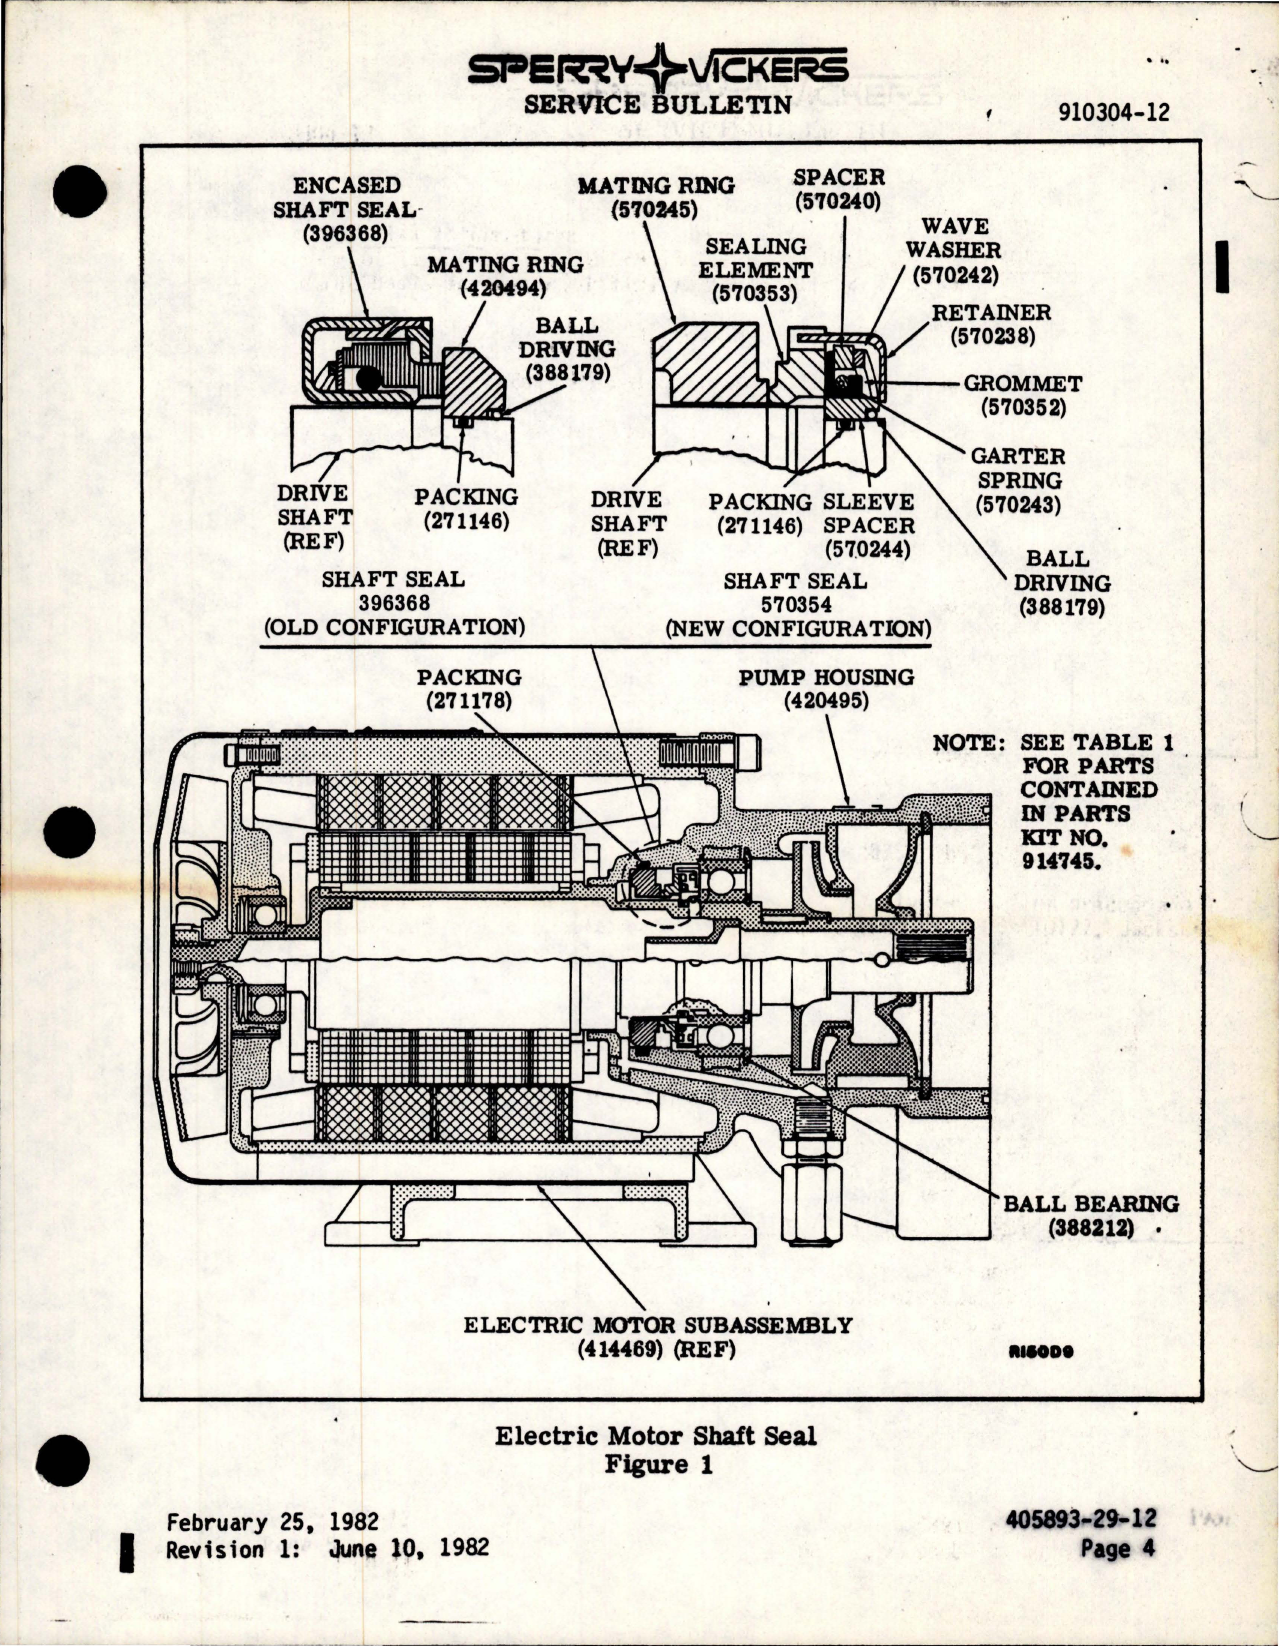 Sample page 5 from AirCorps Library document: Hydraulic Motorpump Assembly - Electric Motor Shaft Seal and Mating Ring Change - Part 414470 - Model MPEV3-032-1E